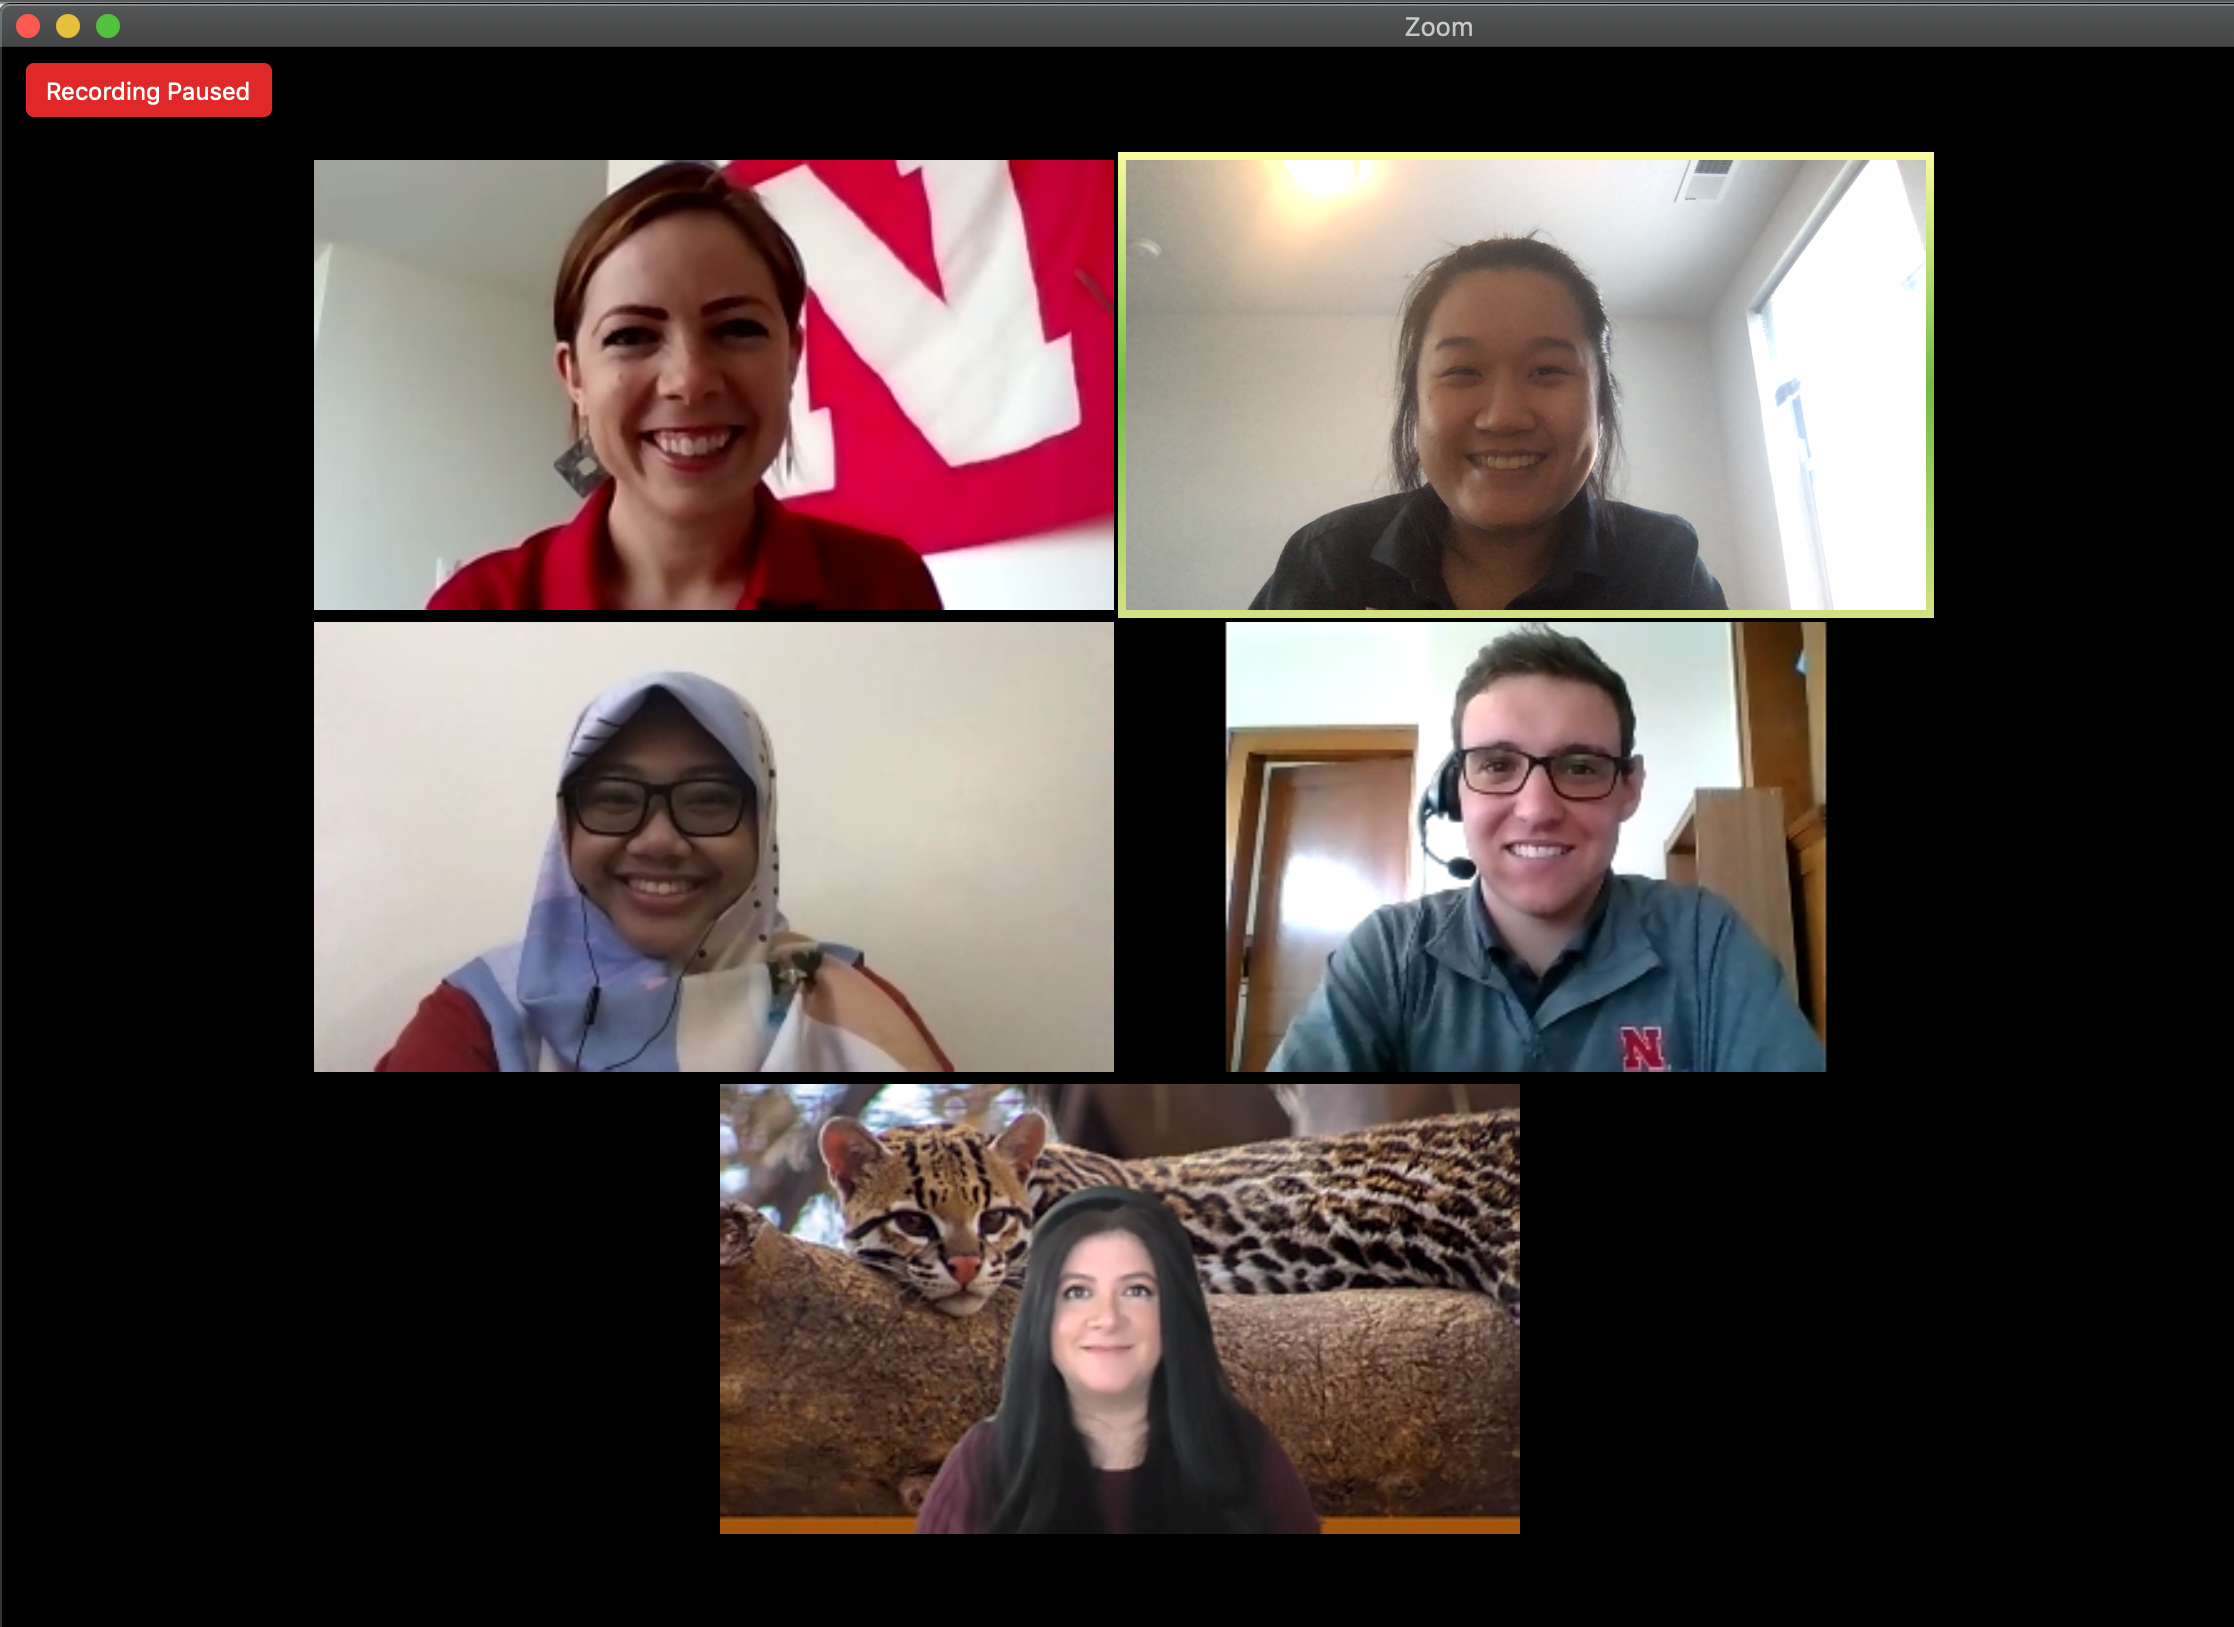 Zoom meeting screenshot featuring past and present Fulbright scholars who shared their Nebraska experiences (second row l to r: Kiki Rizki Amalia and Agustín Olivo, third row: Gabriela Palomo-Munoz) participate in an online panel discussion, moderated by IANR Global Staff Brianne Wolf and Yi Xuen Tay (first row, l to r) 